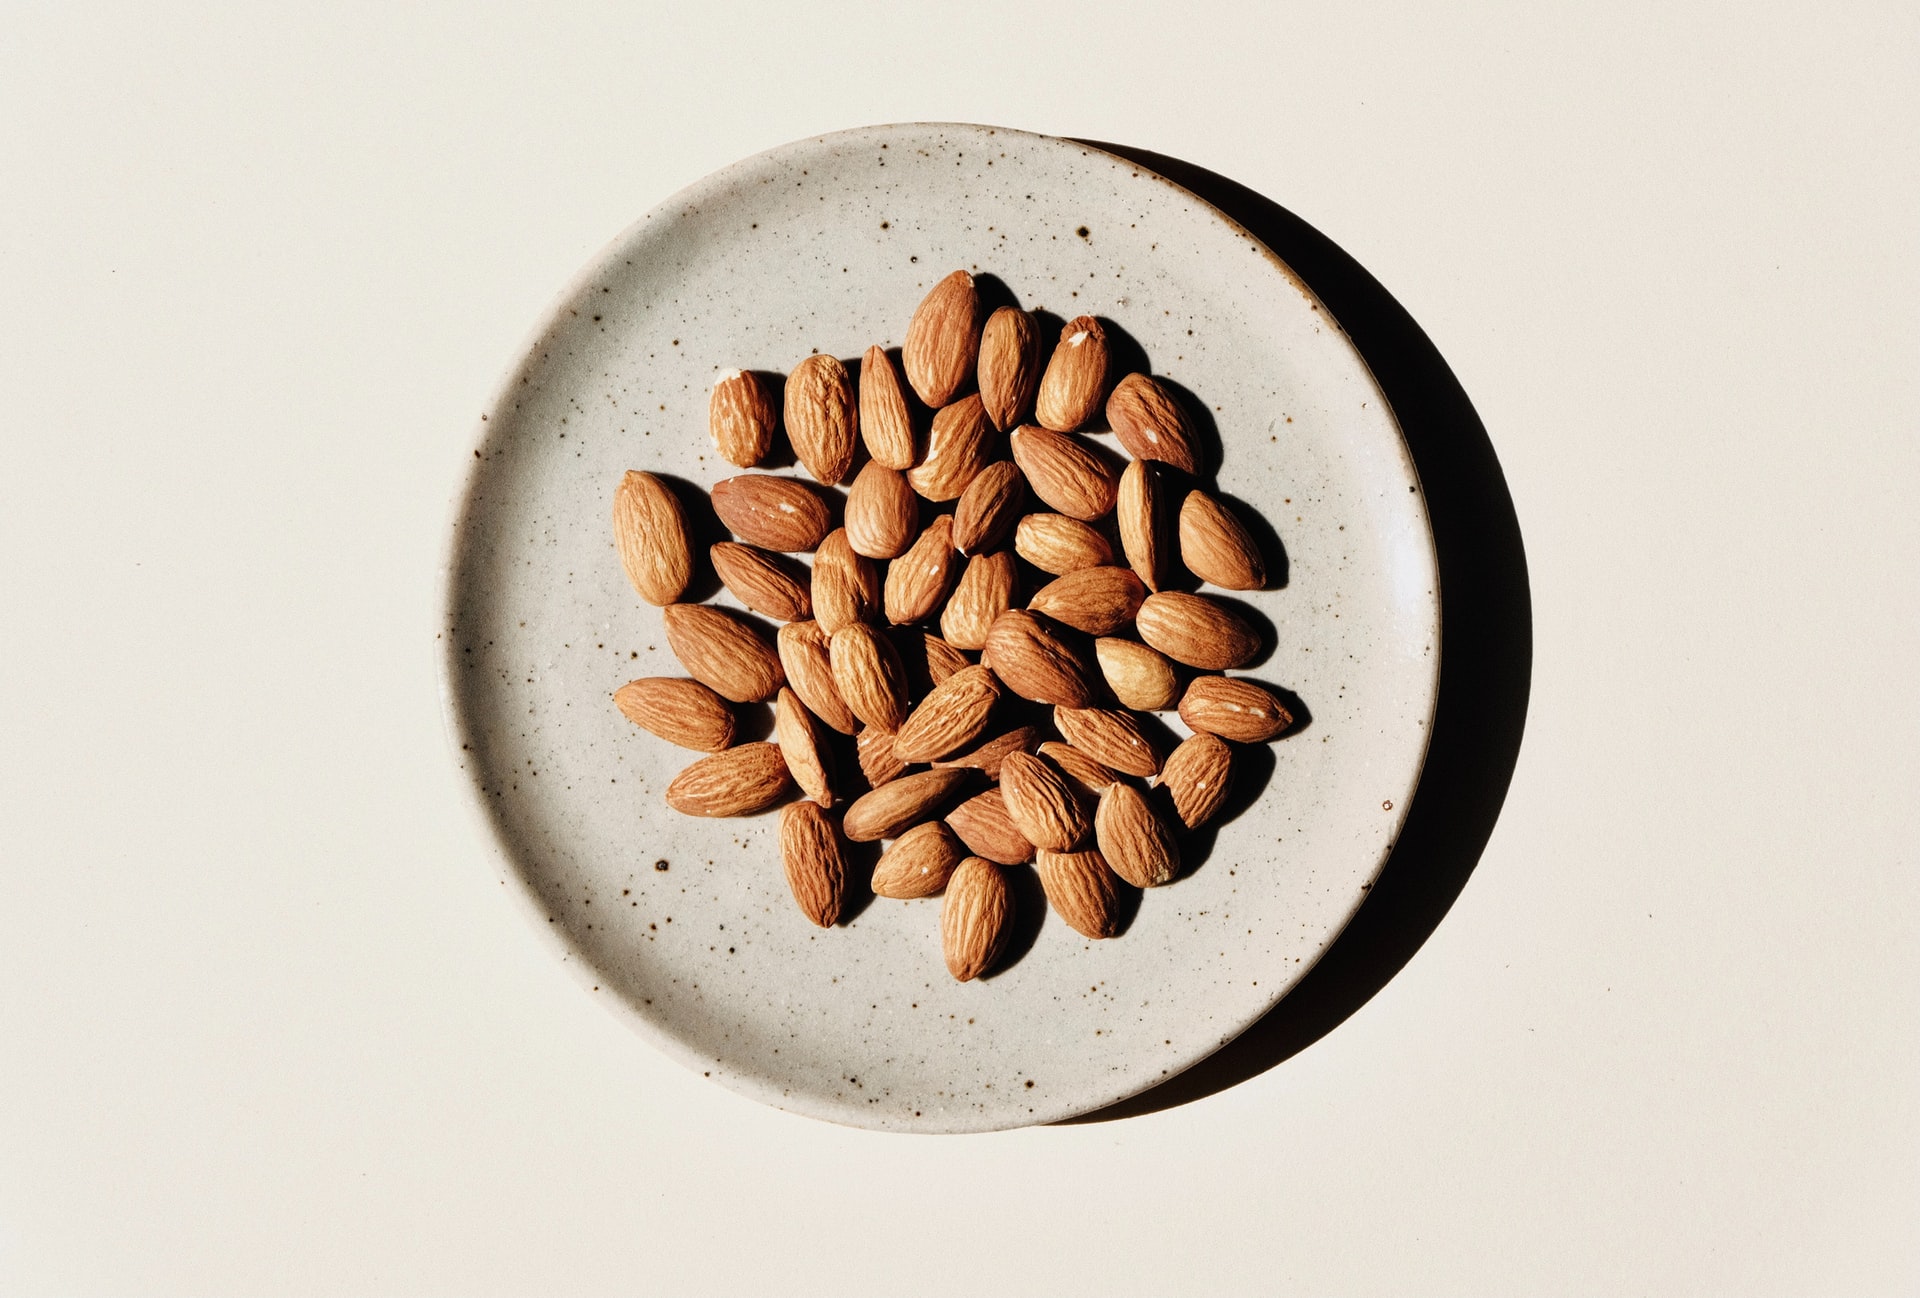 Geek insider, geekinsider, geekinsider. Com,, what are the health benefits of almonds? , living